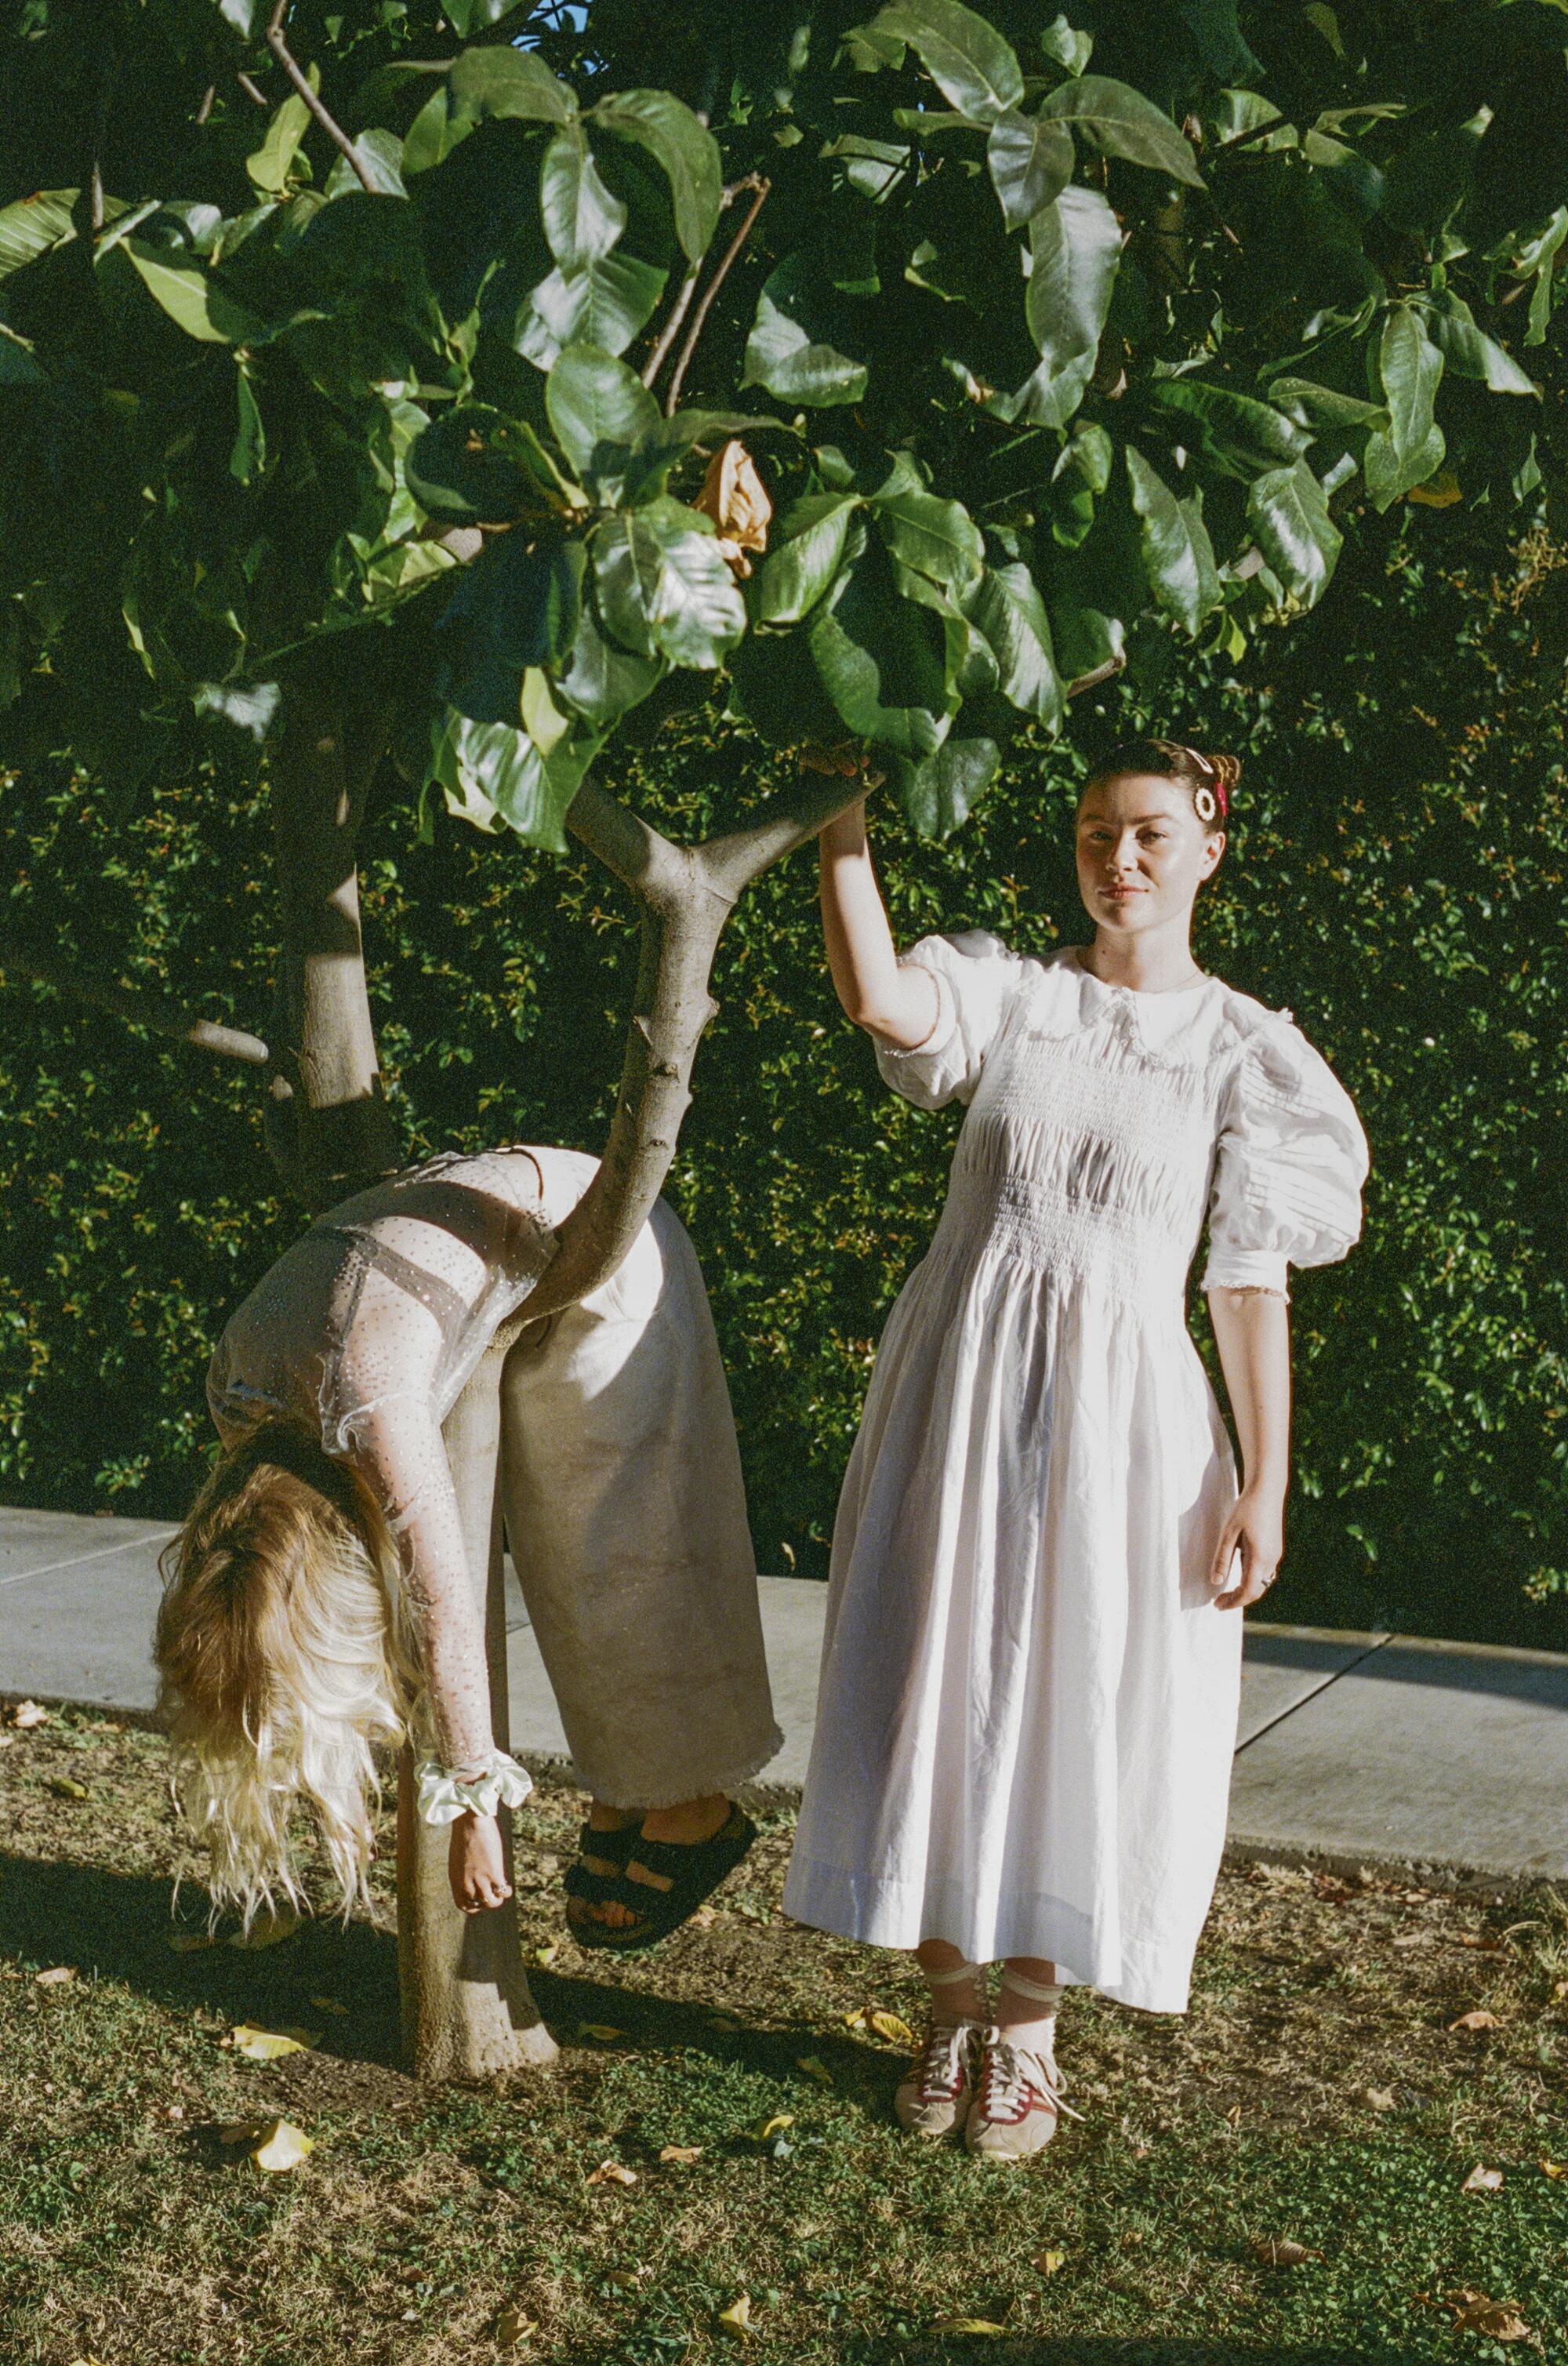 Two women in dresses, the one on the left is draped over a tree branch